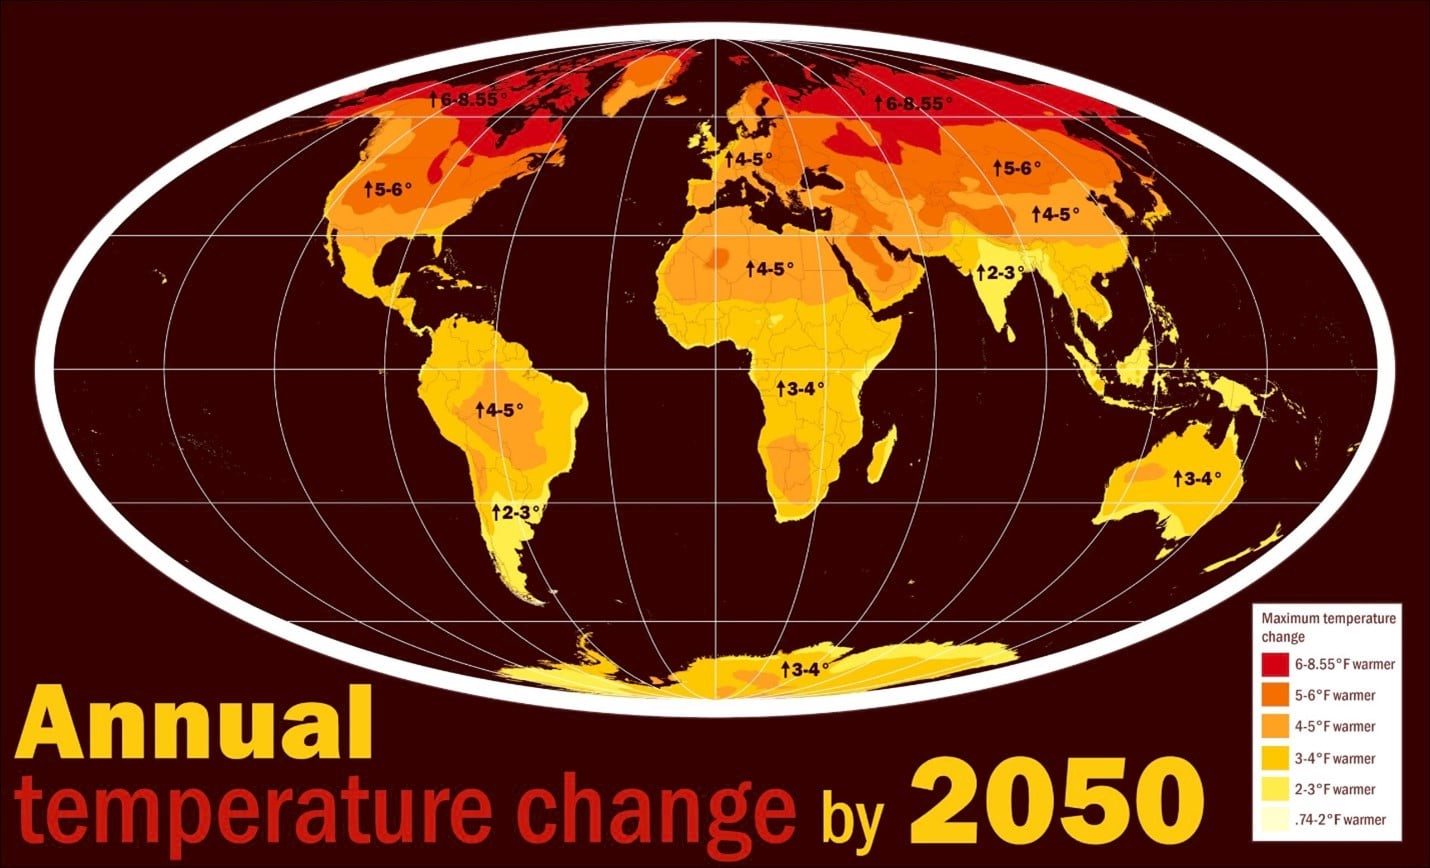 Change in mean annual temperature by 2050 compared to historical baseline (1971-2000) under business-as-usual high emissions scenario (SSP5-8.5).